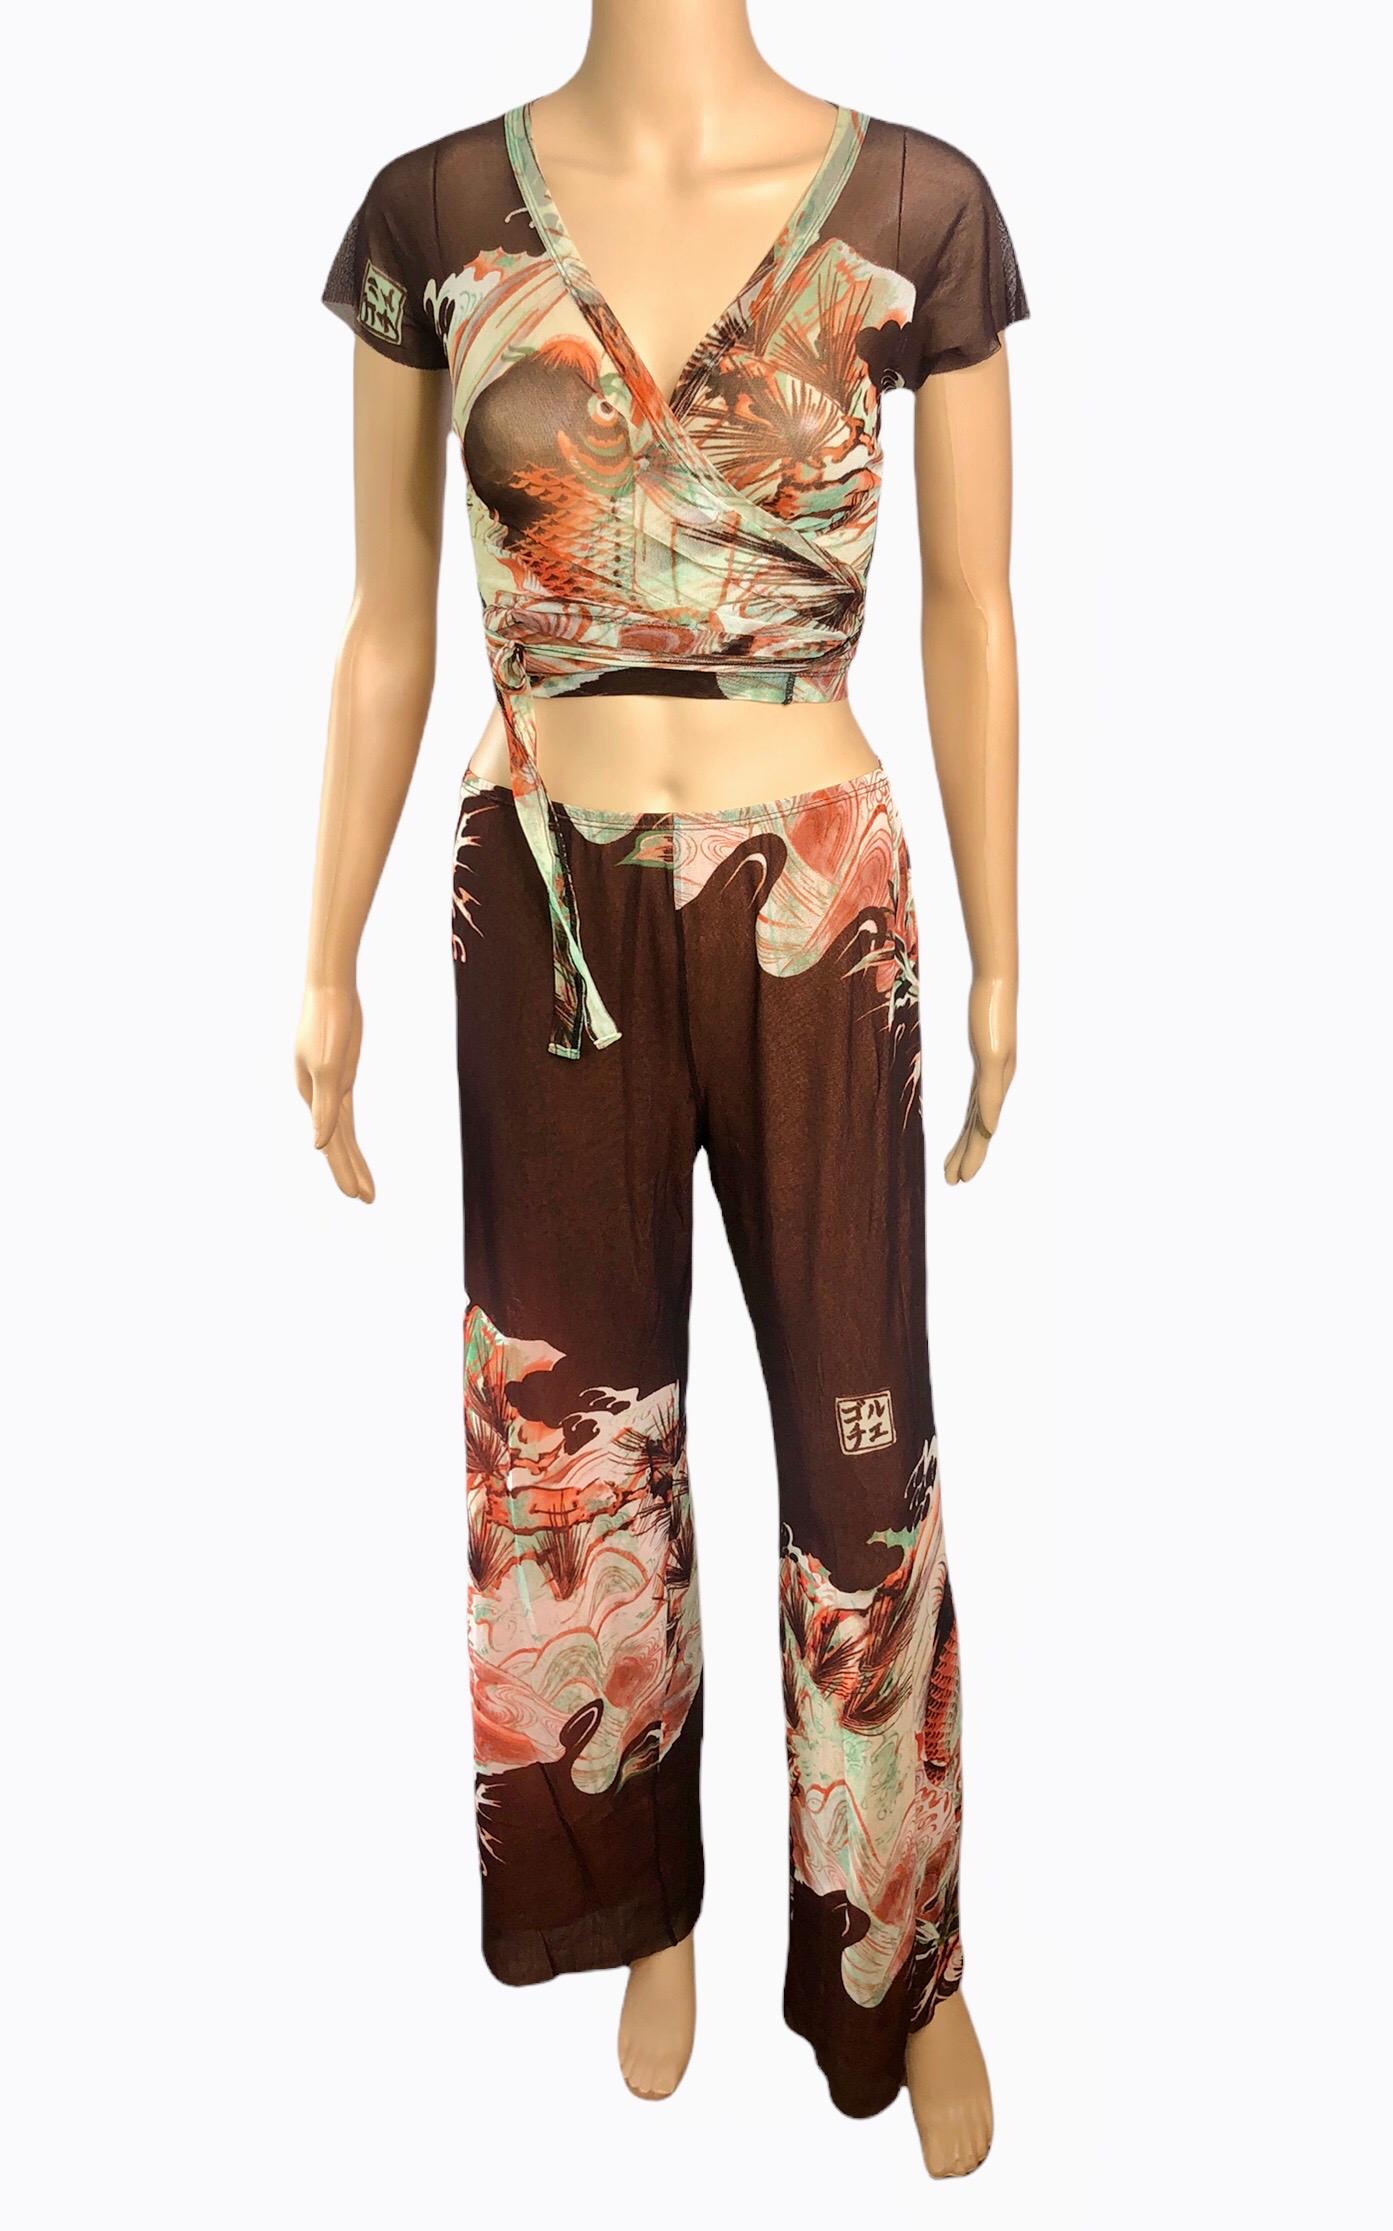 Jean Paul Gaultier Soleil Vintage Semi-Sheer Mesh Japanese Koi Fish Tattoo Print Wrap Crop Top & Pants Ensemble 2 Piece Set Size S

Please note the pants are size S, the top is missing the size tag.

